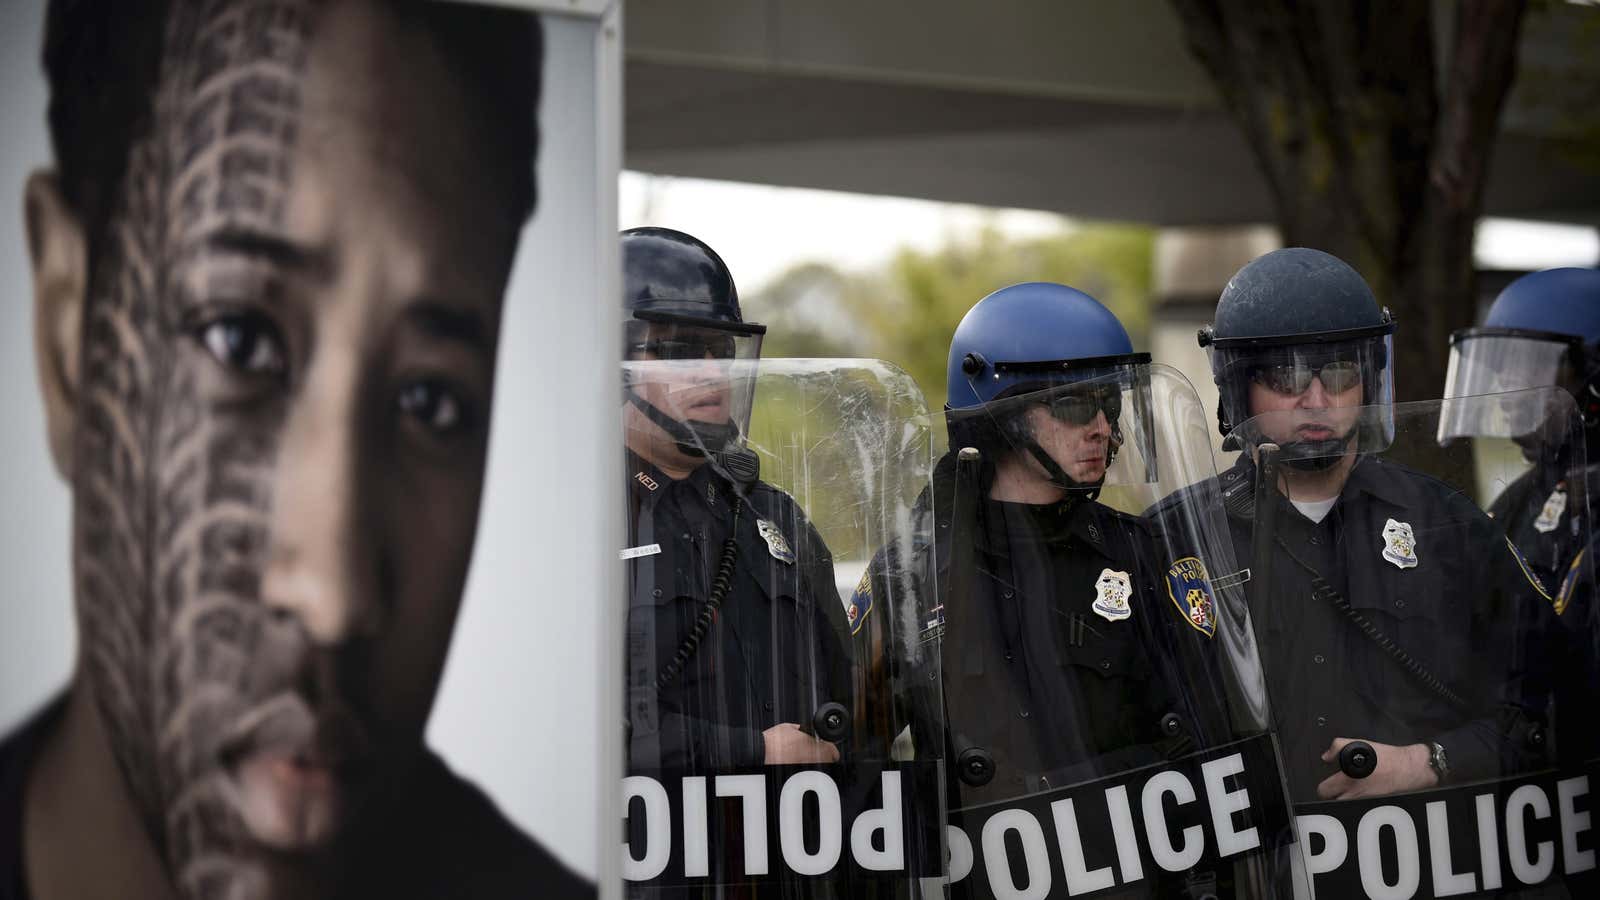 Police form a line during clashes with protesters near Mondawmin Mall after Freddie Gray’s funeral in Baltimore, Maryland.